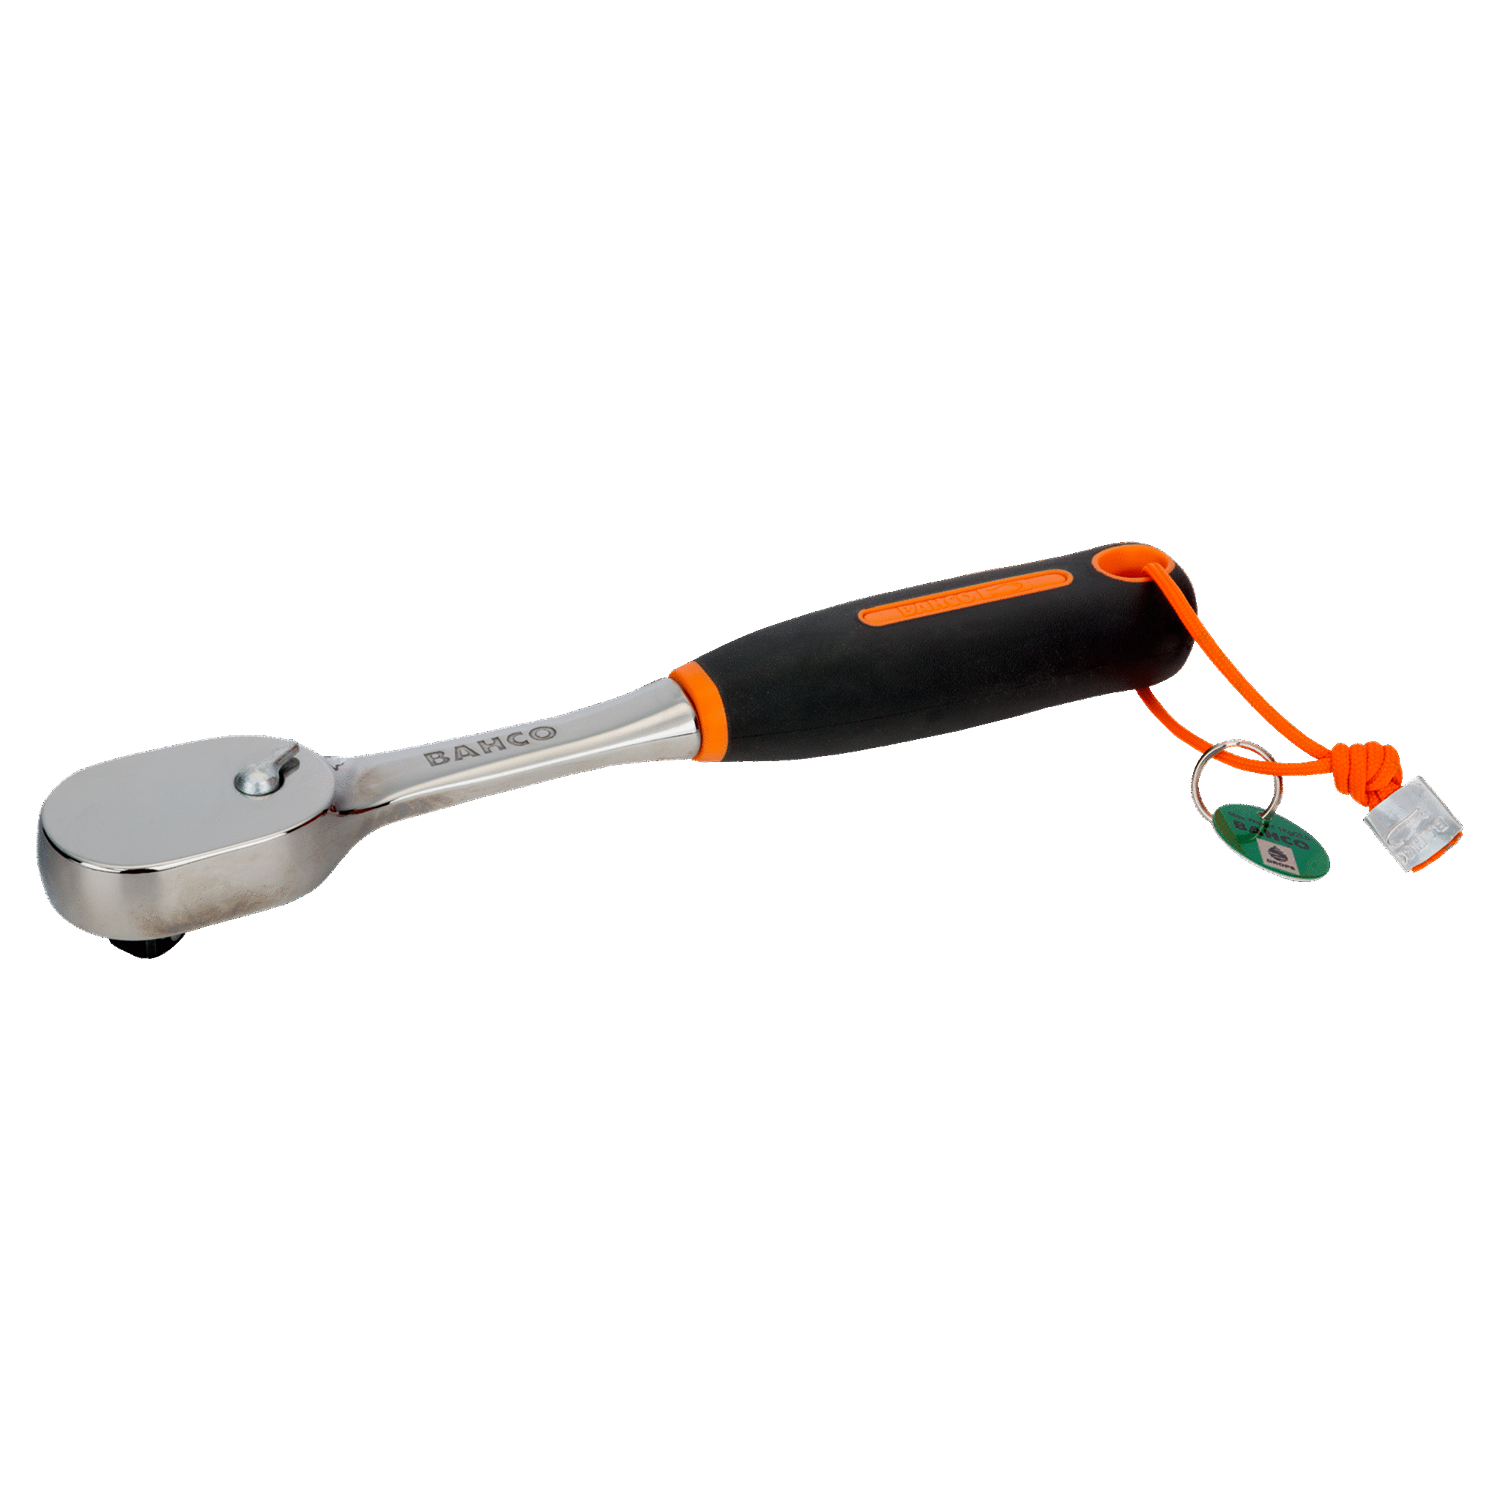 BAHCO TAH8150-1/2 1/2” Reversible Ratchet with Sealed Dyneema - Premium Reversible Ratchet from BAHCO - Shop now at Yew Aik.